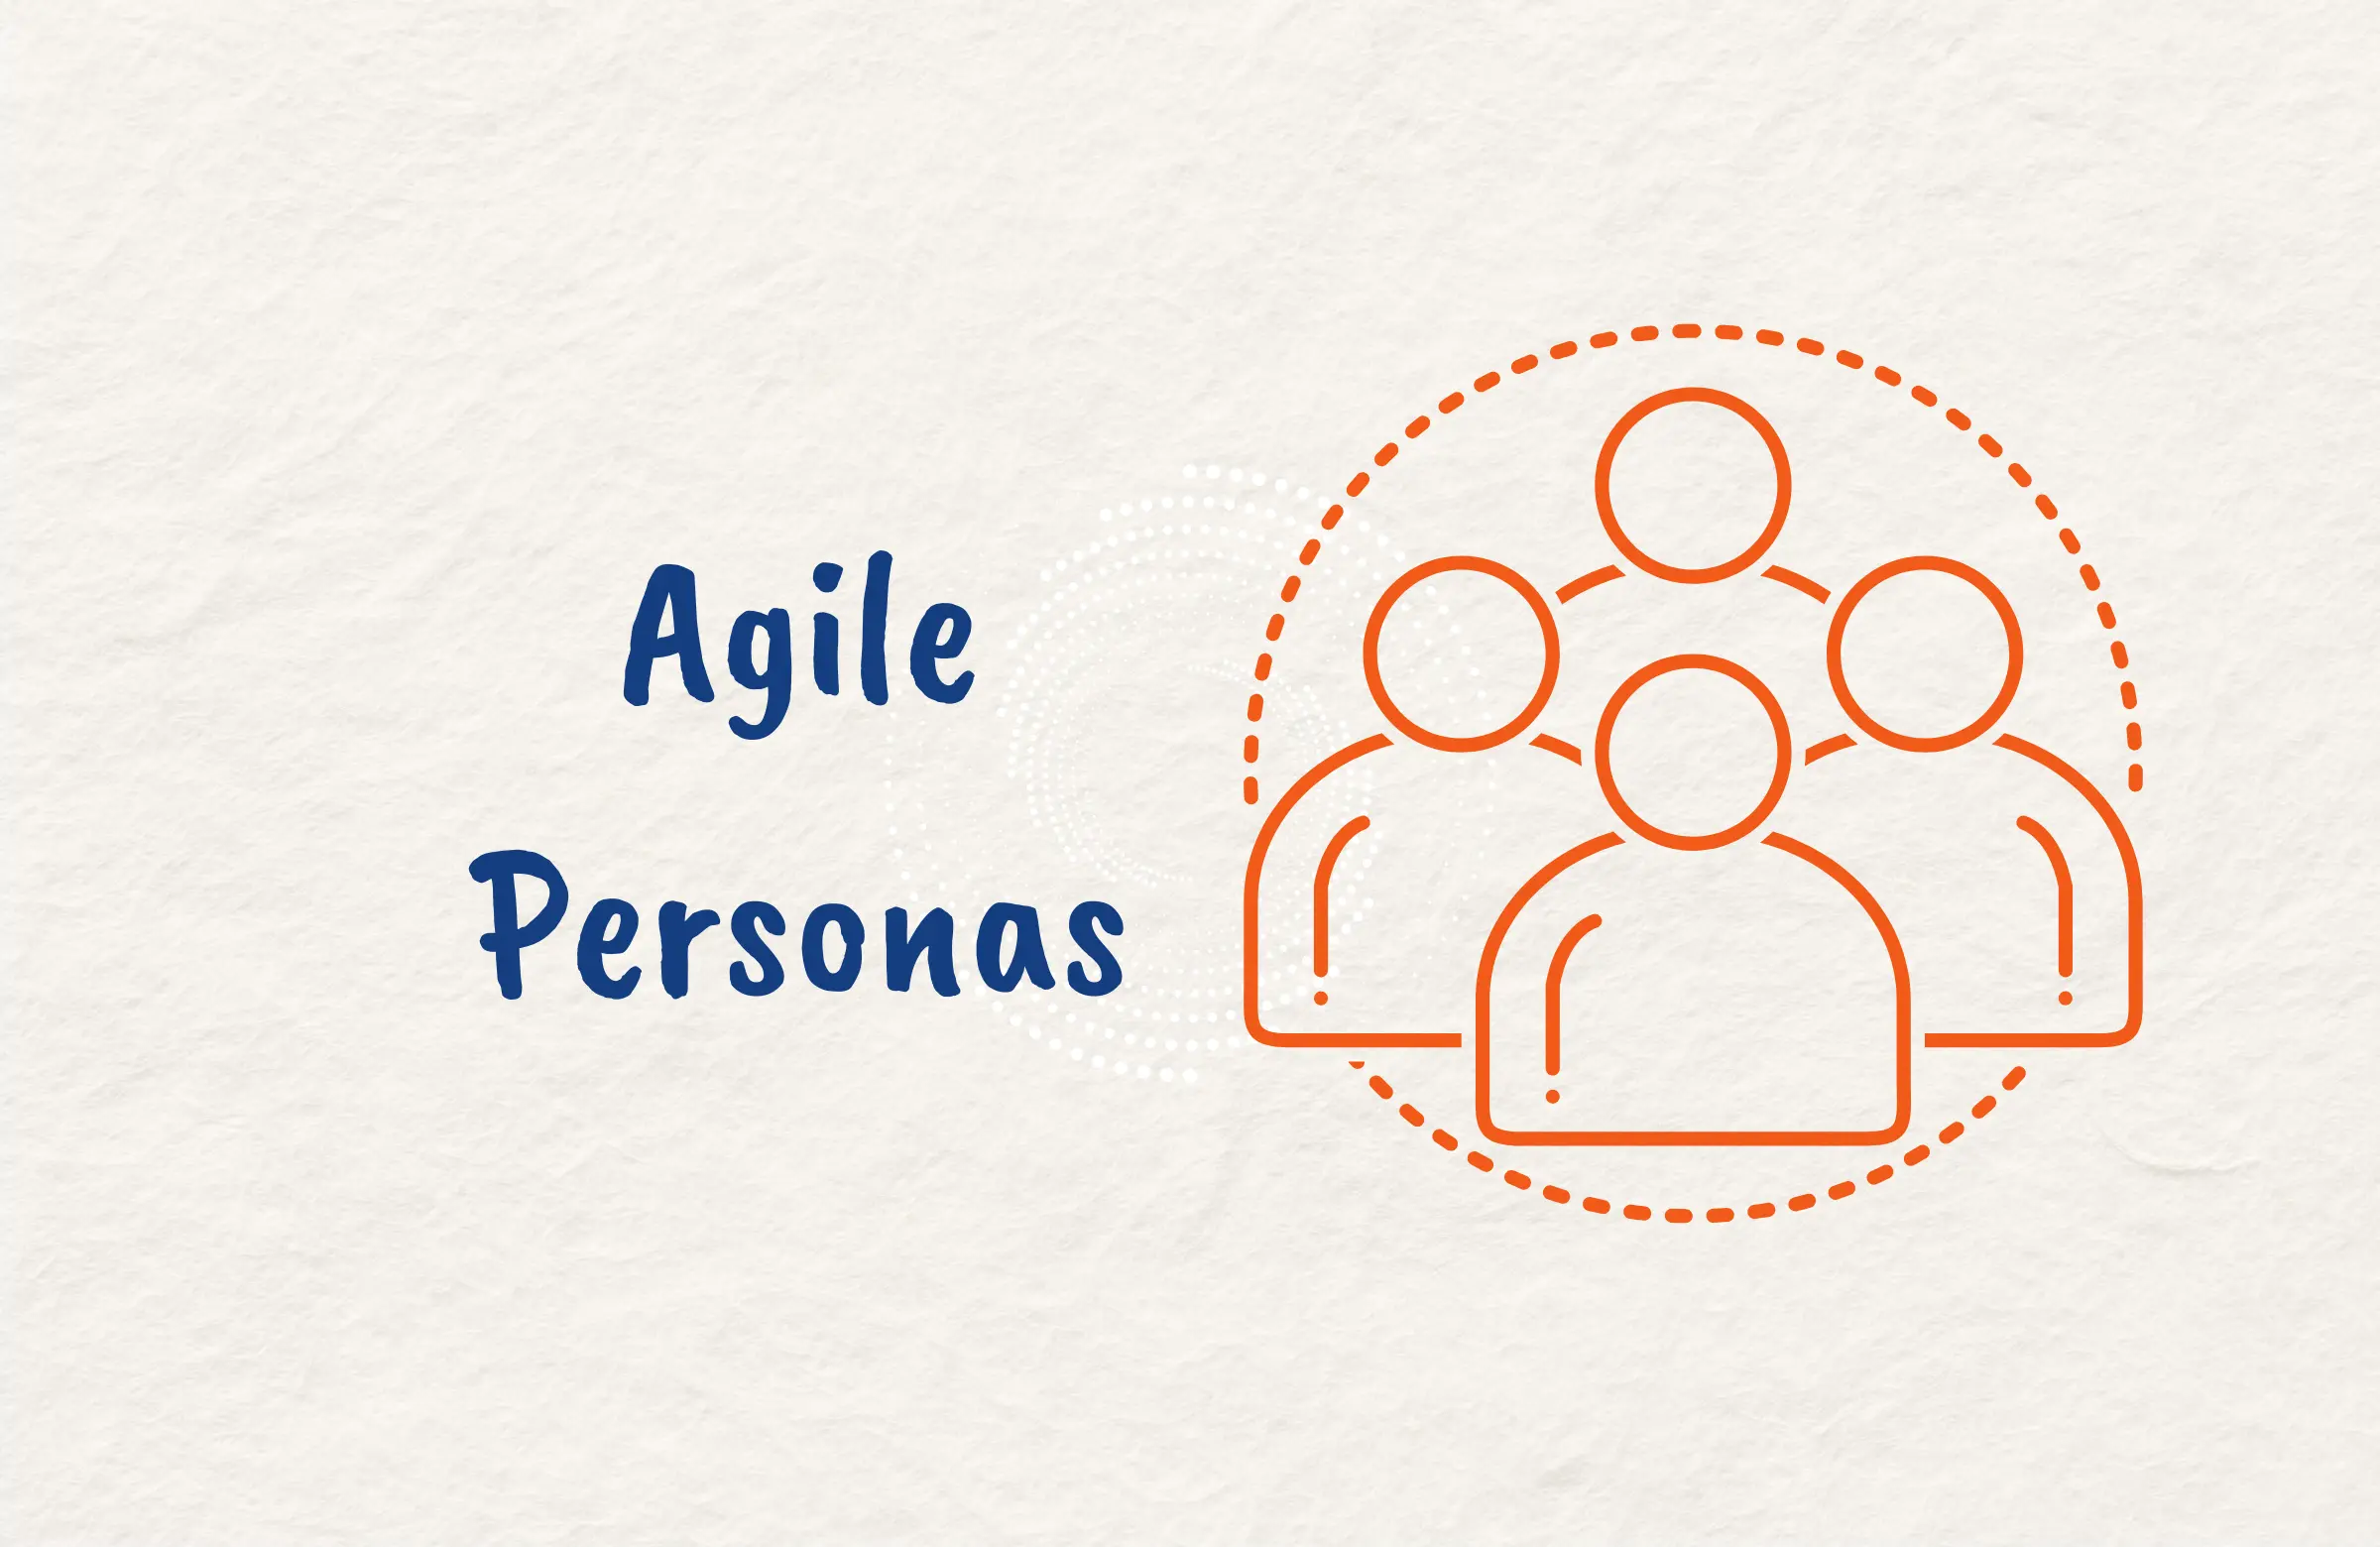 What are Agile Personas